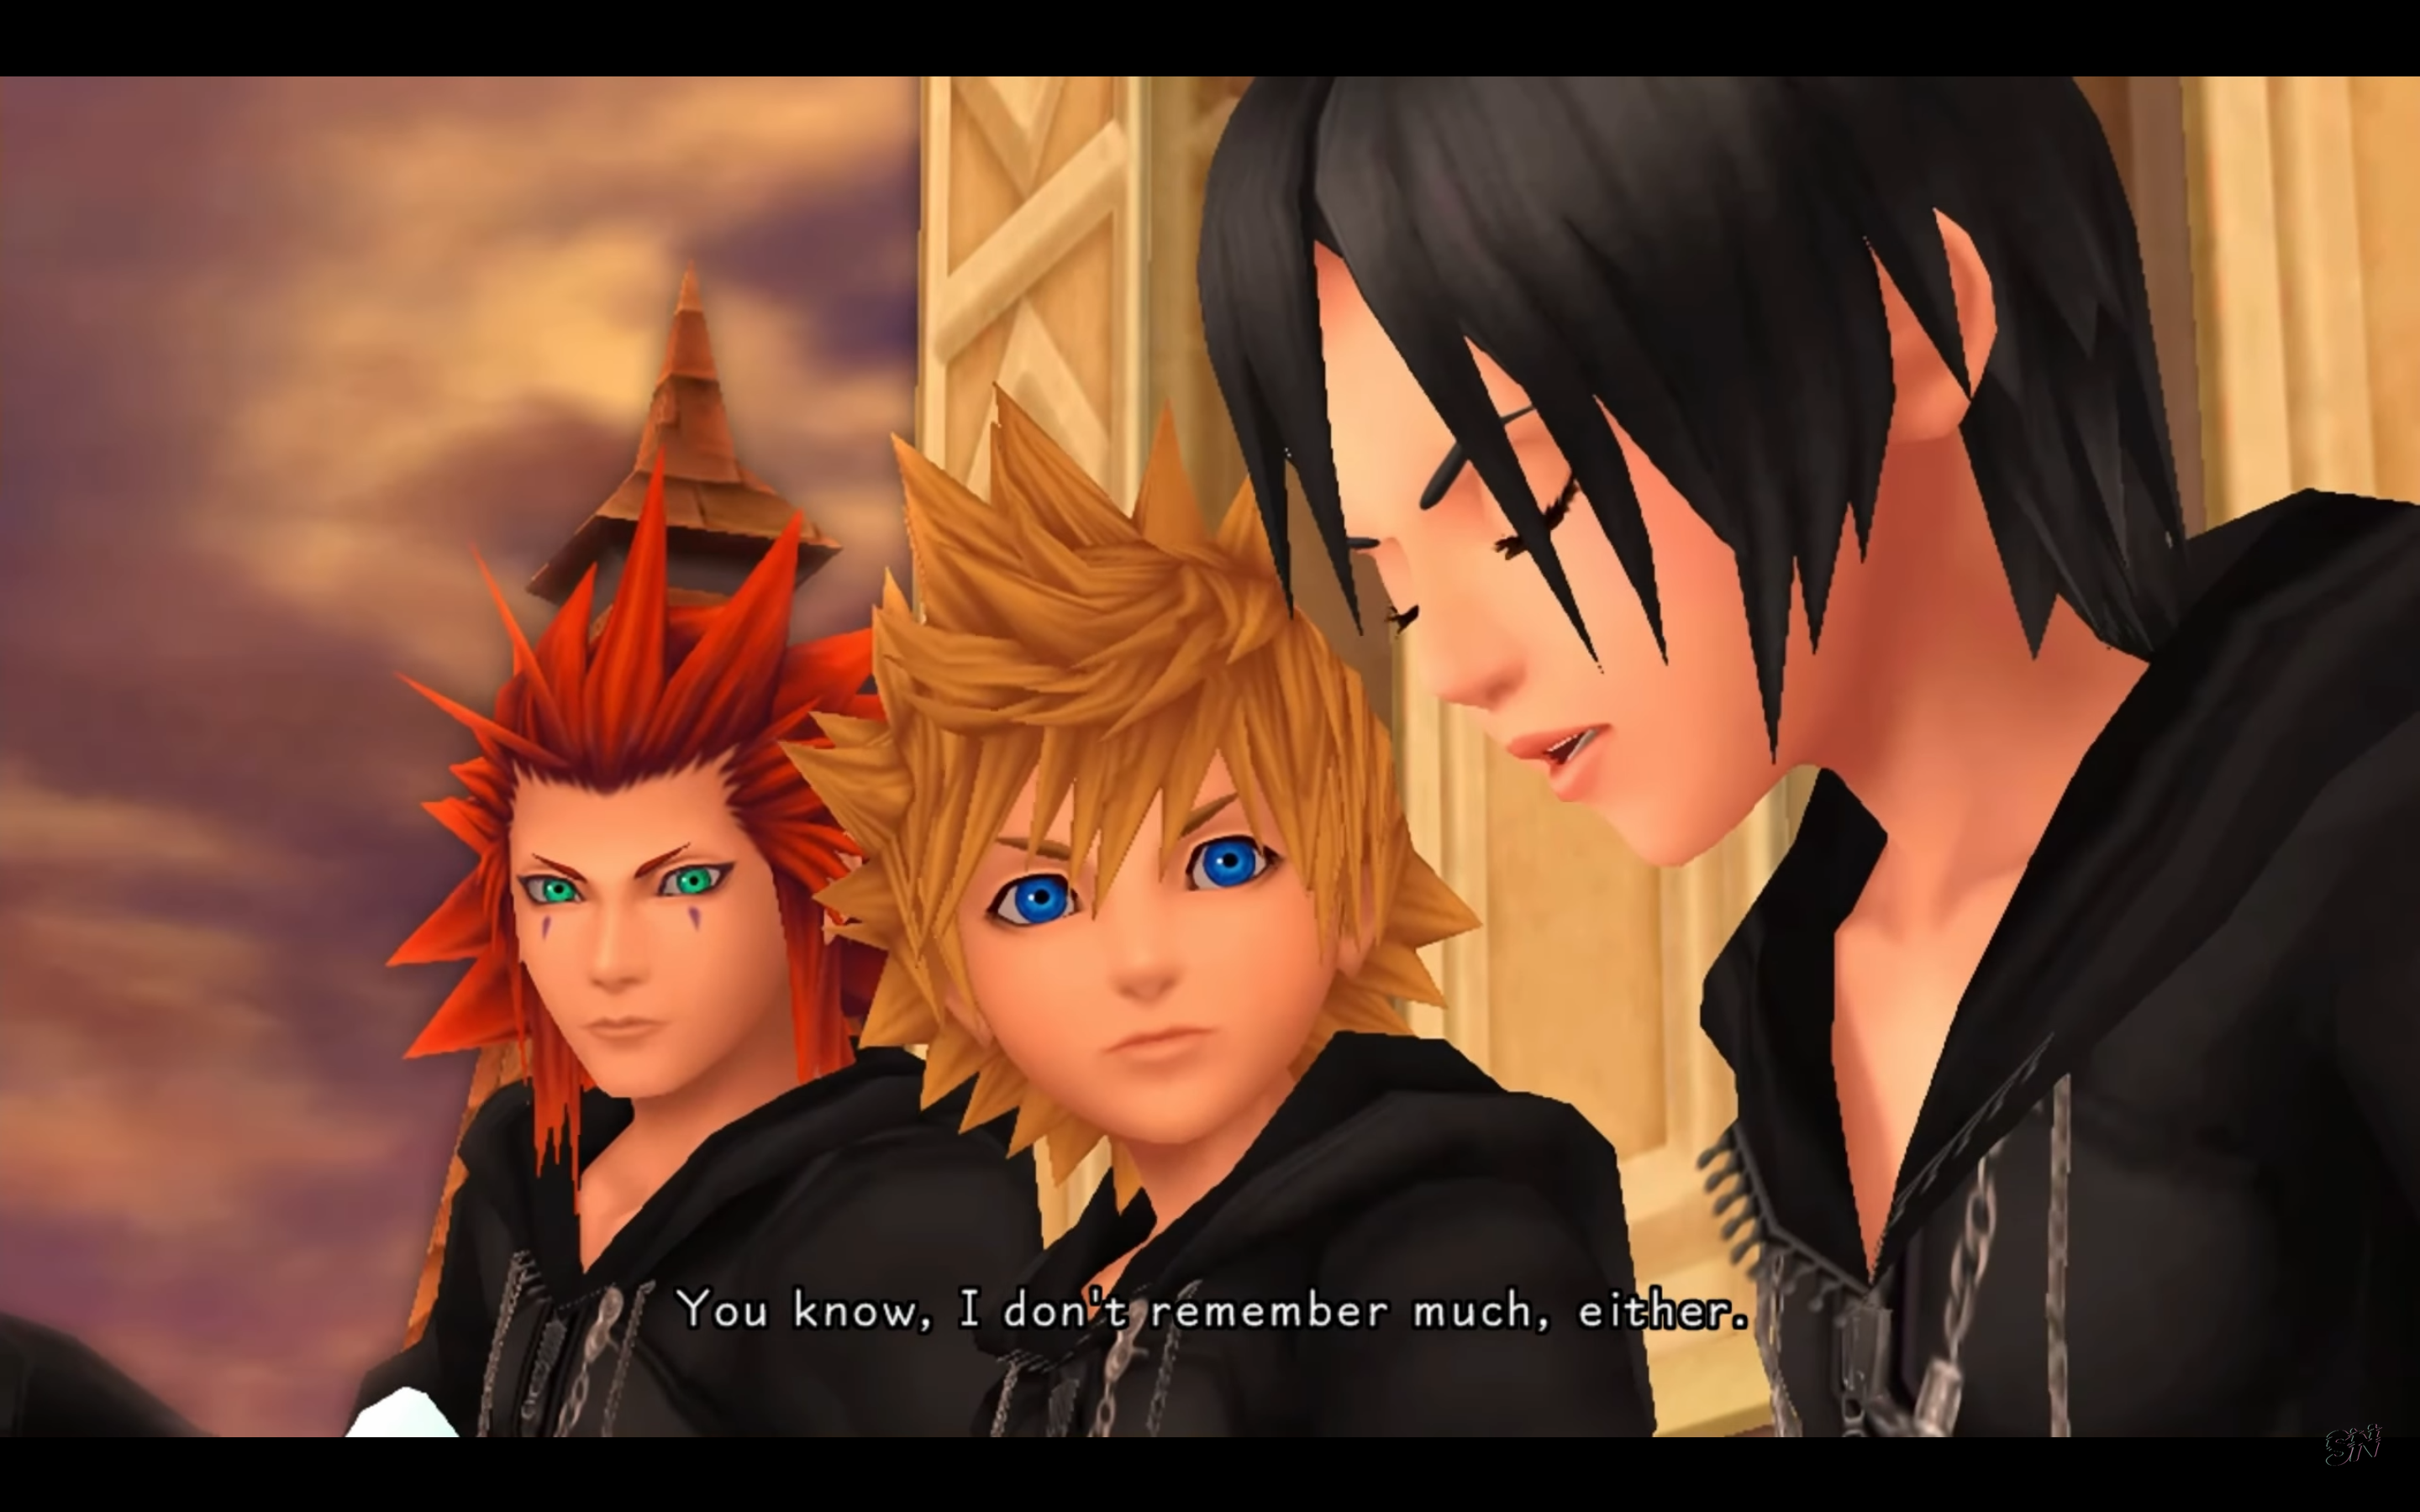 "Kingdom Hearts: 358/2 Days". 2009. Square Enix.
Axel and Roxas listen to Xion on the clocktower.